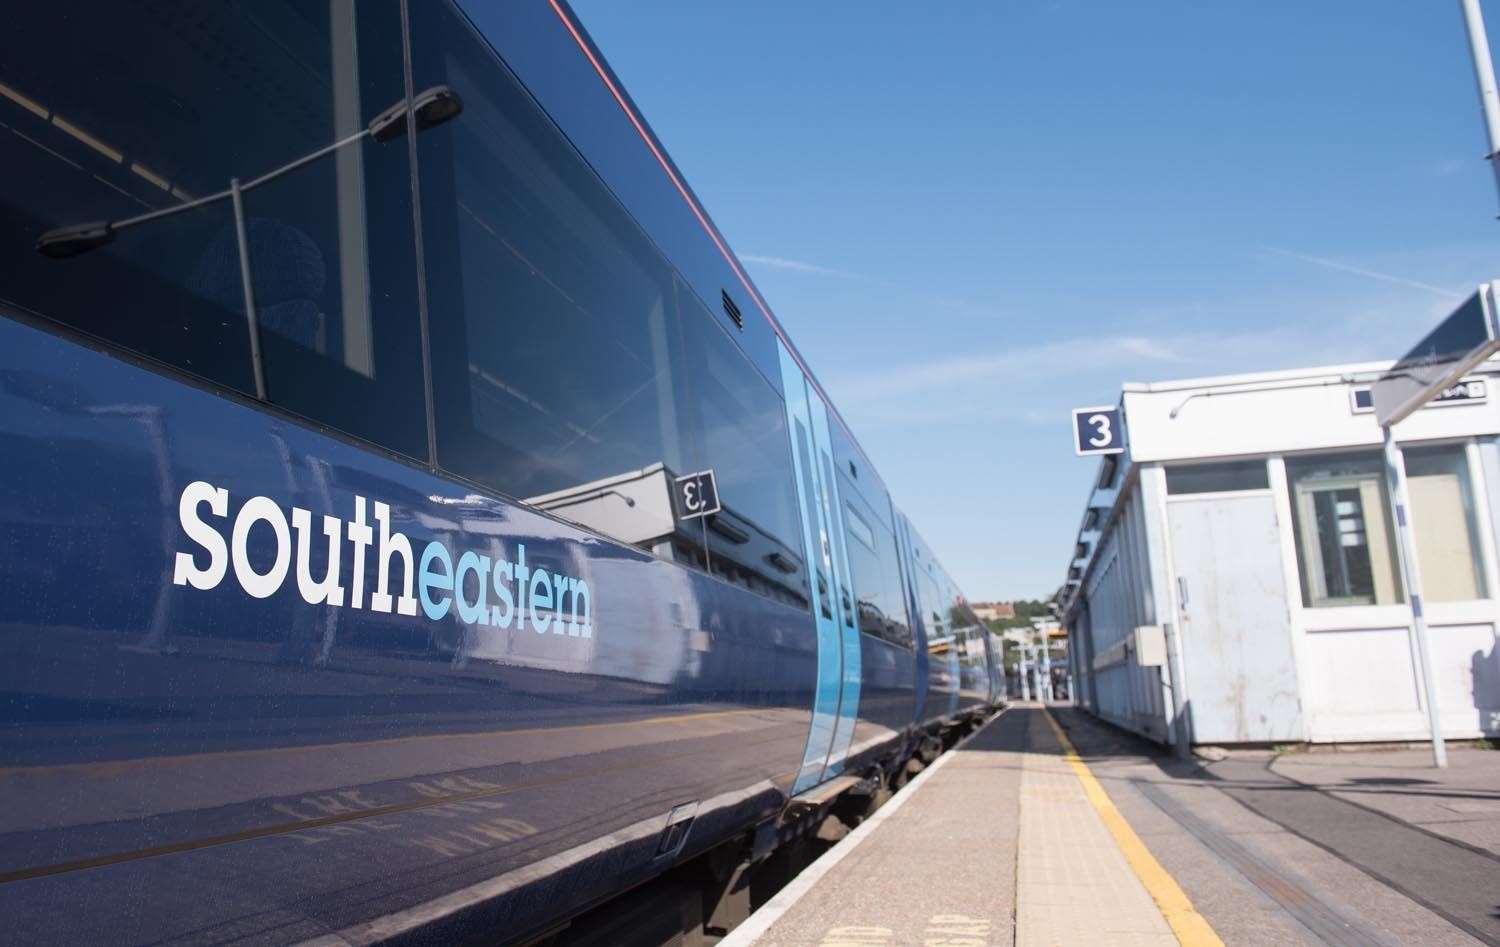 Several Southeastern services will be affected tomorrow